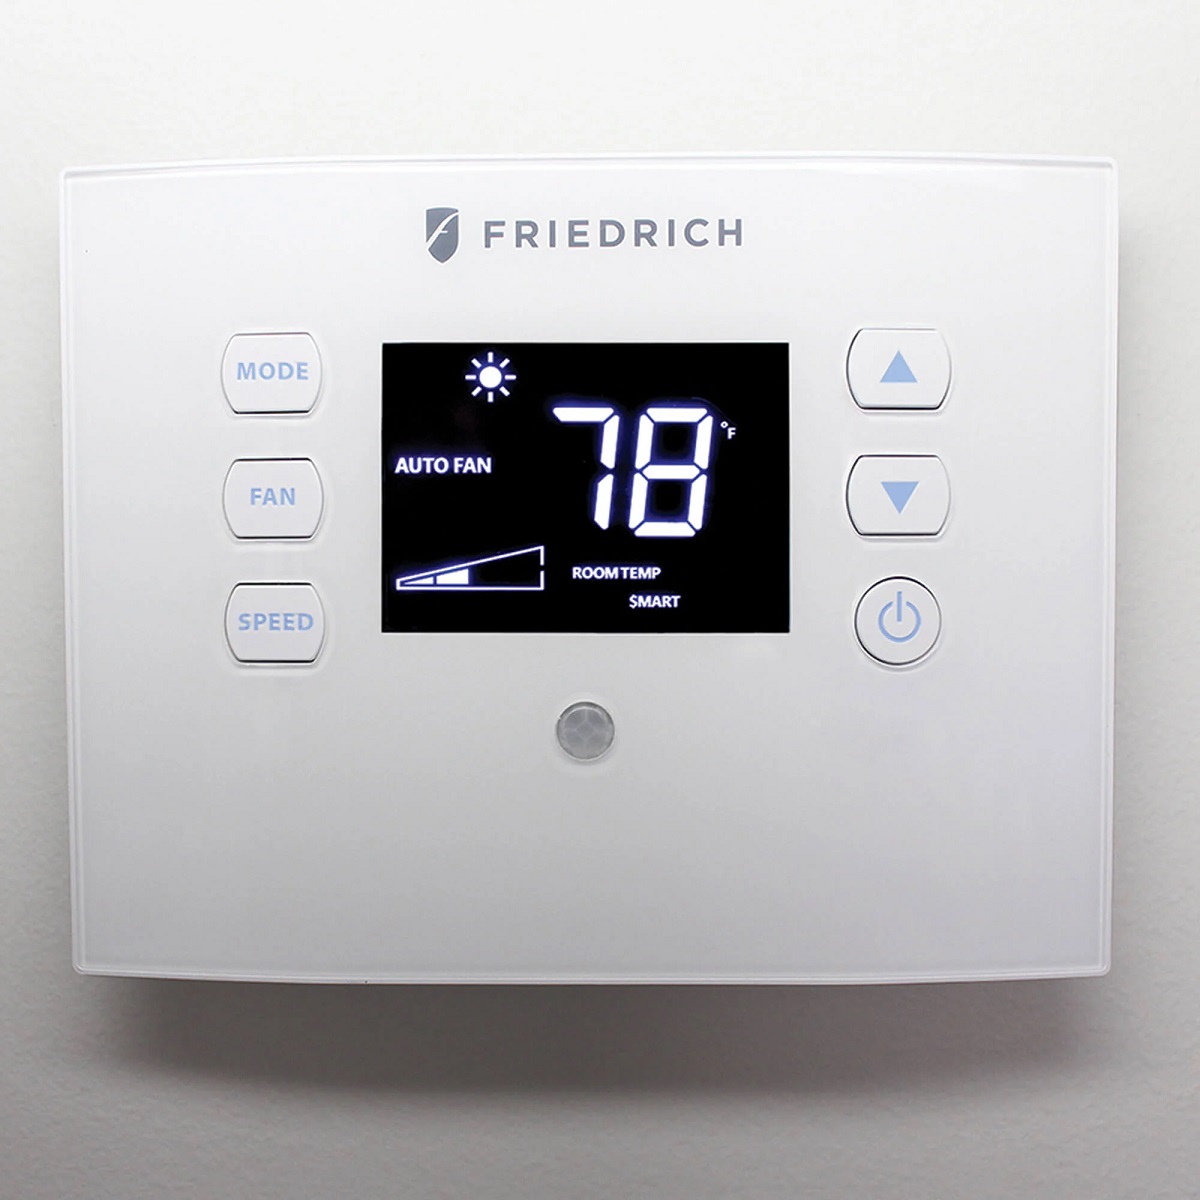 How To Use A Friedrich Thermostat